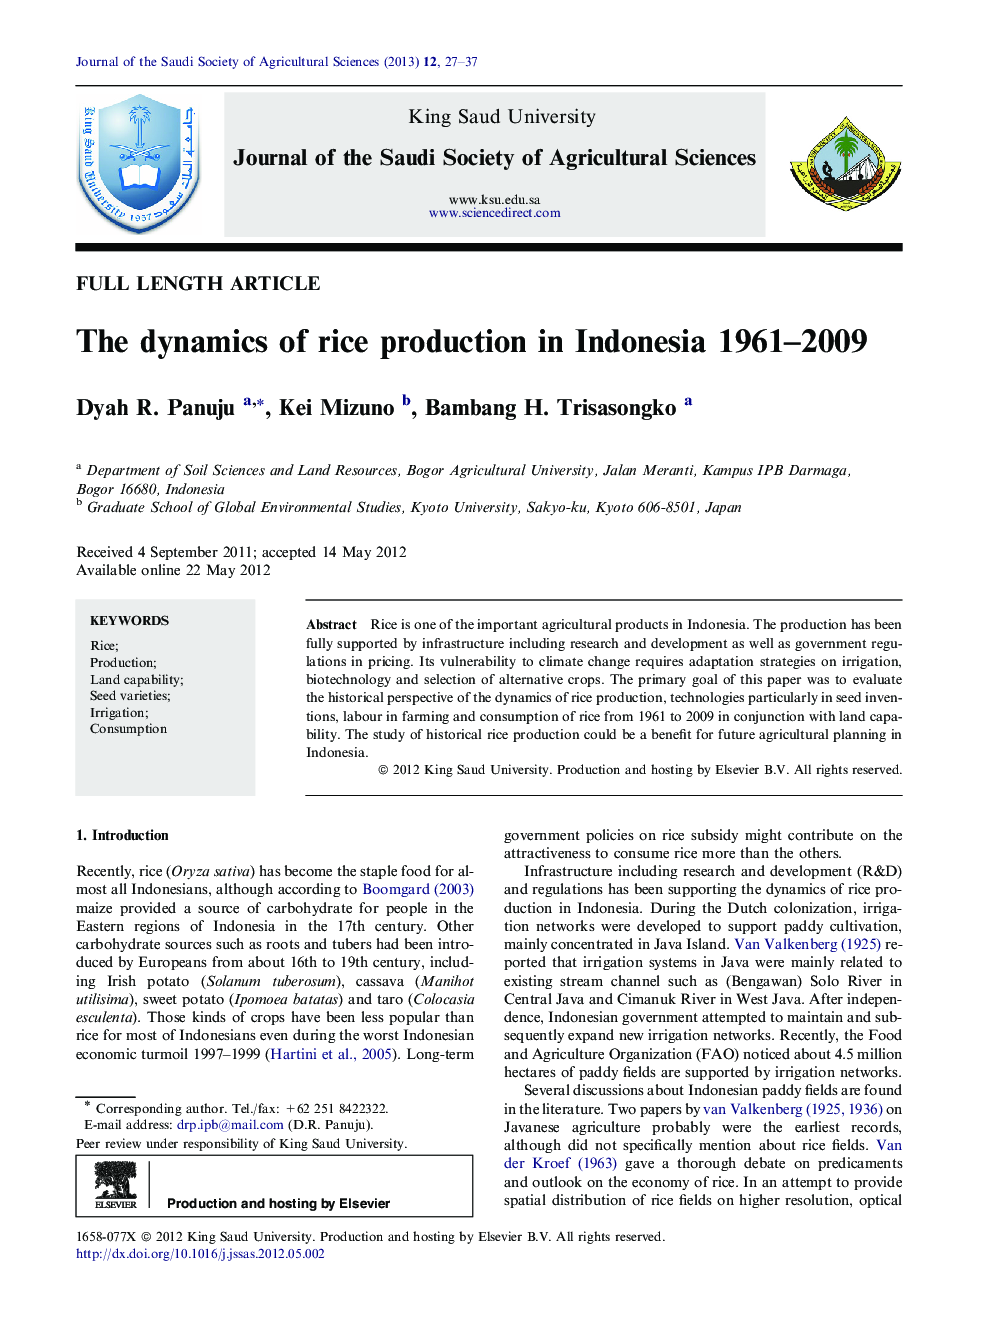 The dynamics of rice production in Indonesia 1961–2009 